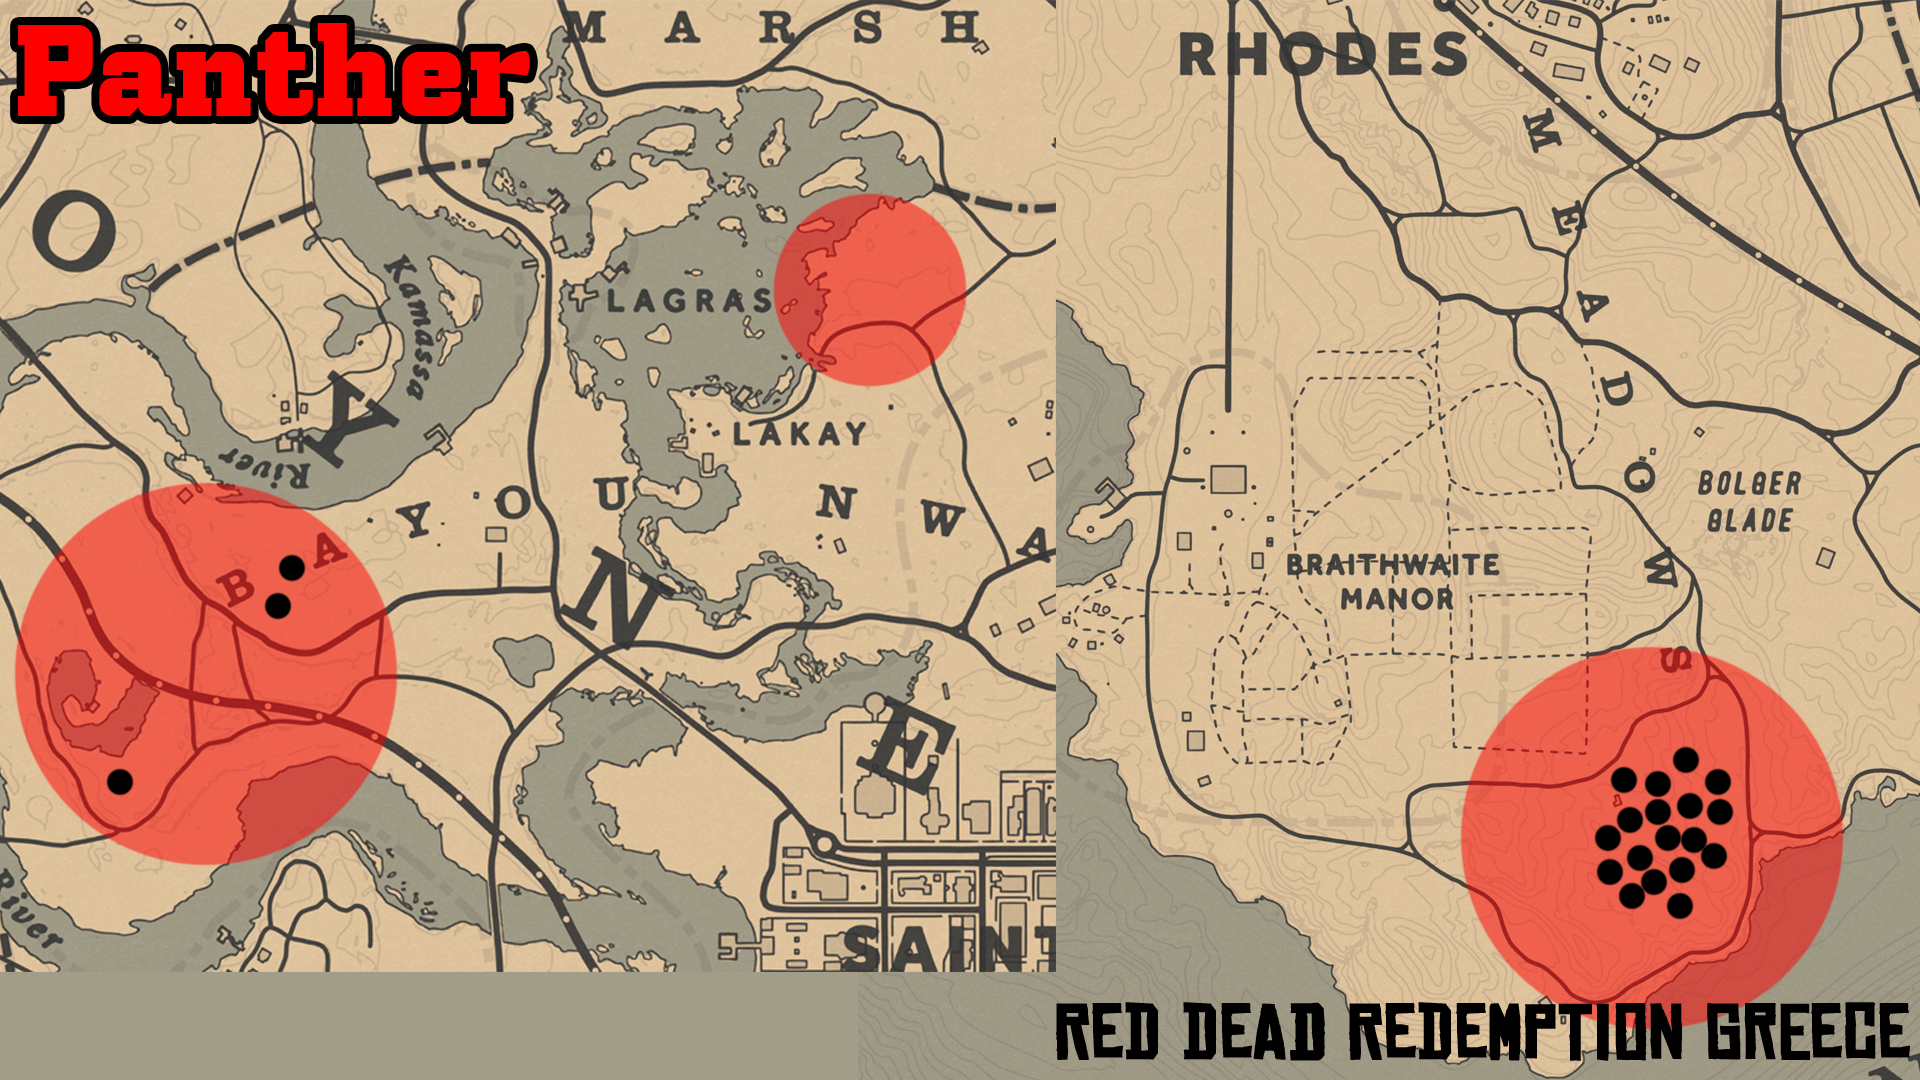 RDR_GREECE on Twitter: "📆Daily Challenges March 2, 2022 Panther, Small Animals, Animal Sample Taken within 10 mins, Farmland Animals #RedDeadOnline #RedDeadDailies #RDO #RedDeadRedemption #DailyChallenges #Dailies #RockstarGames ...